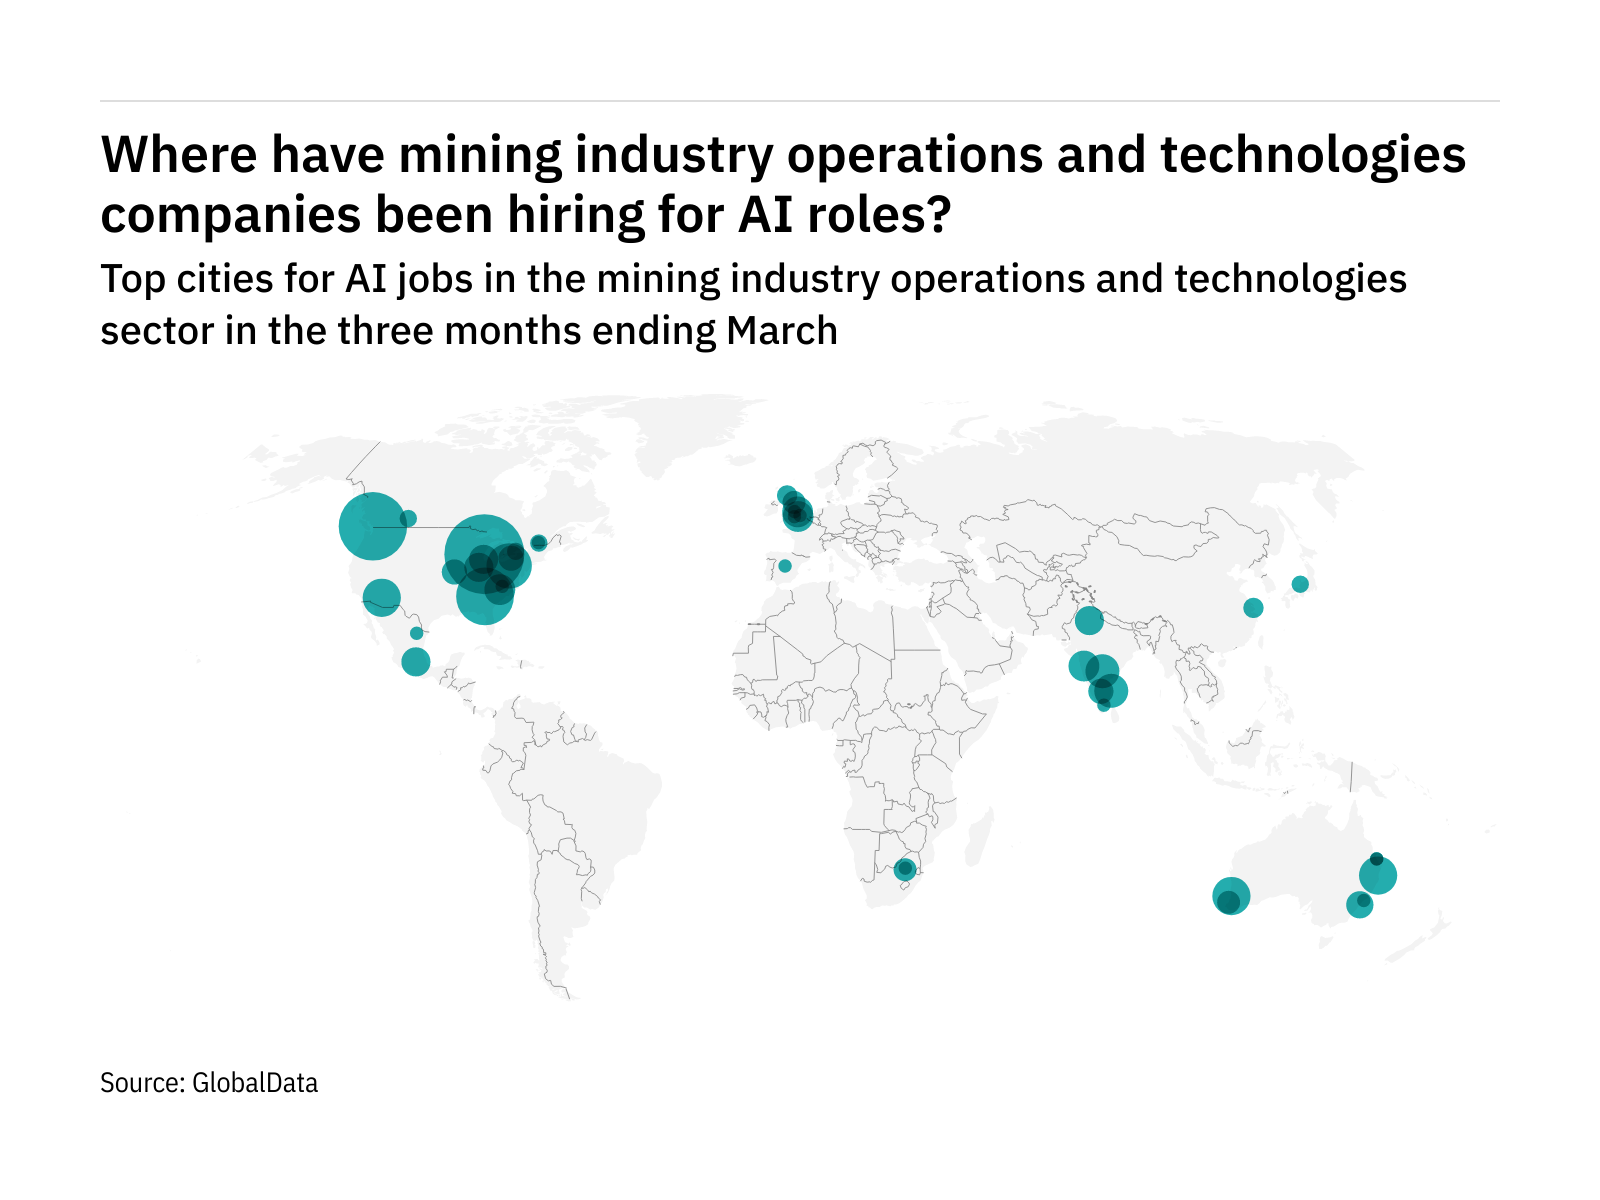 North America is seeing a hiring boom in mining industry AI roles